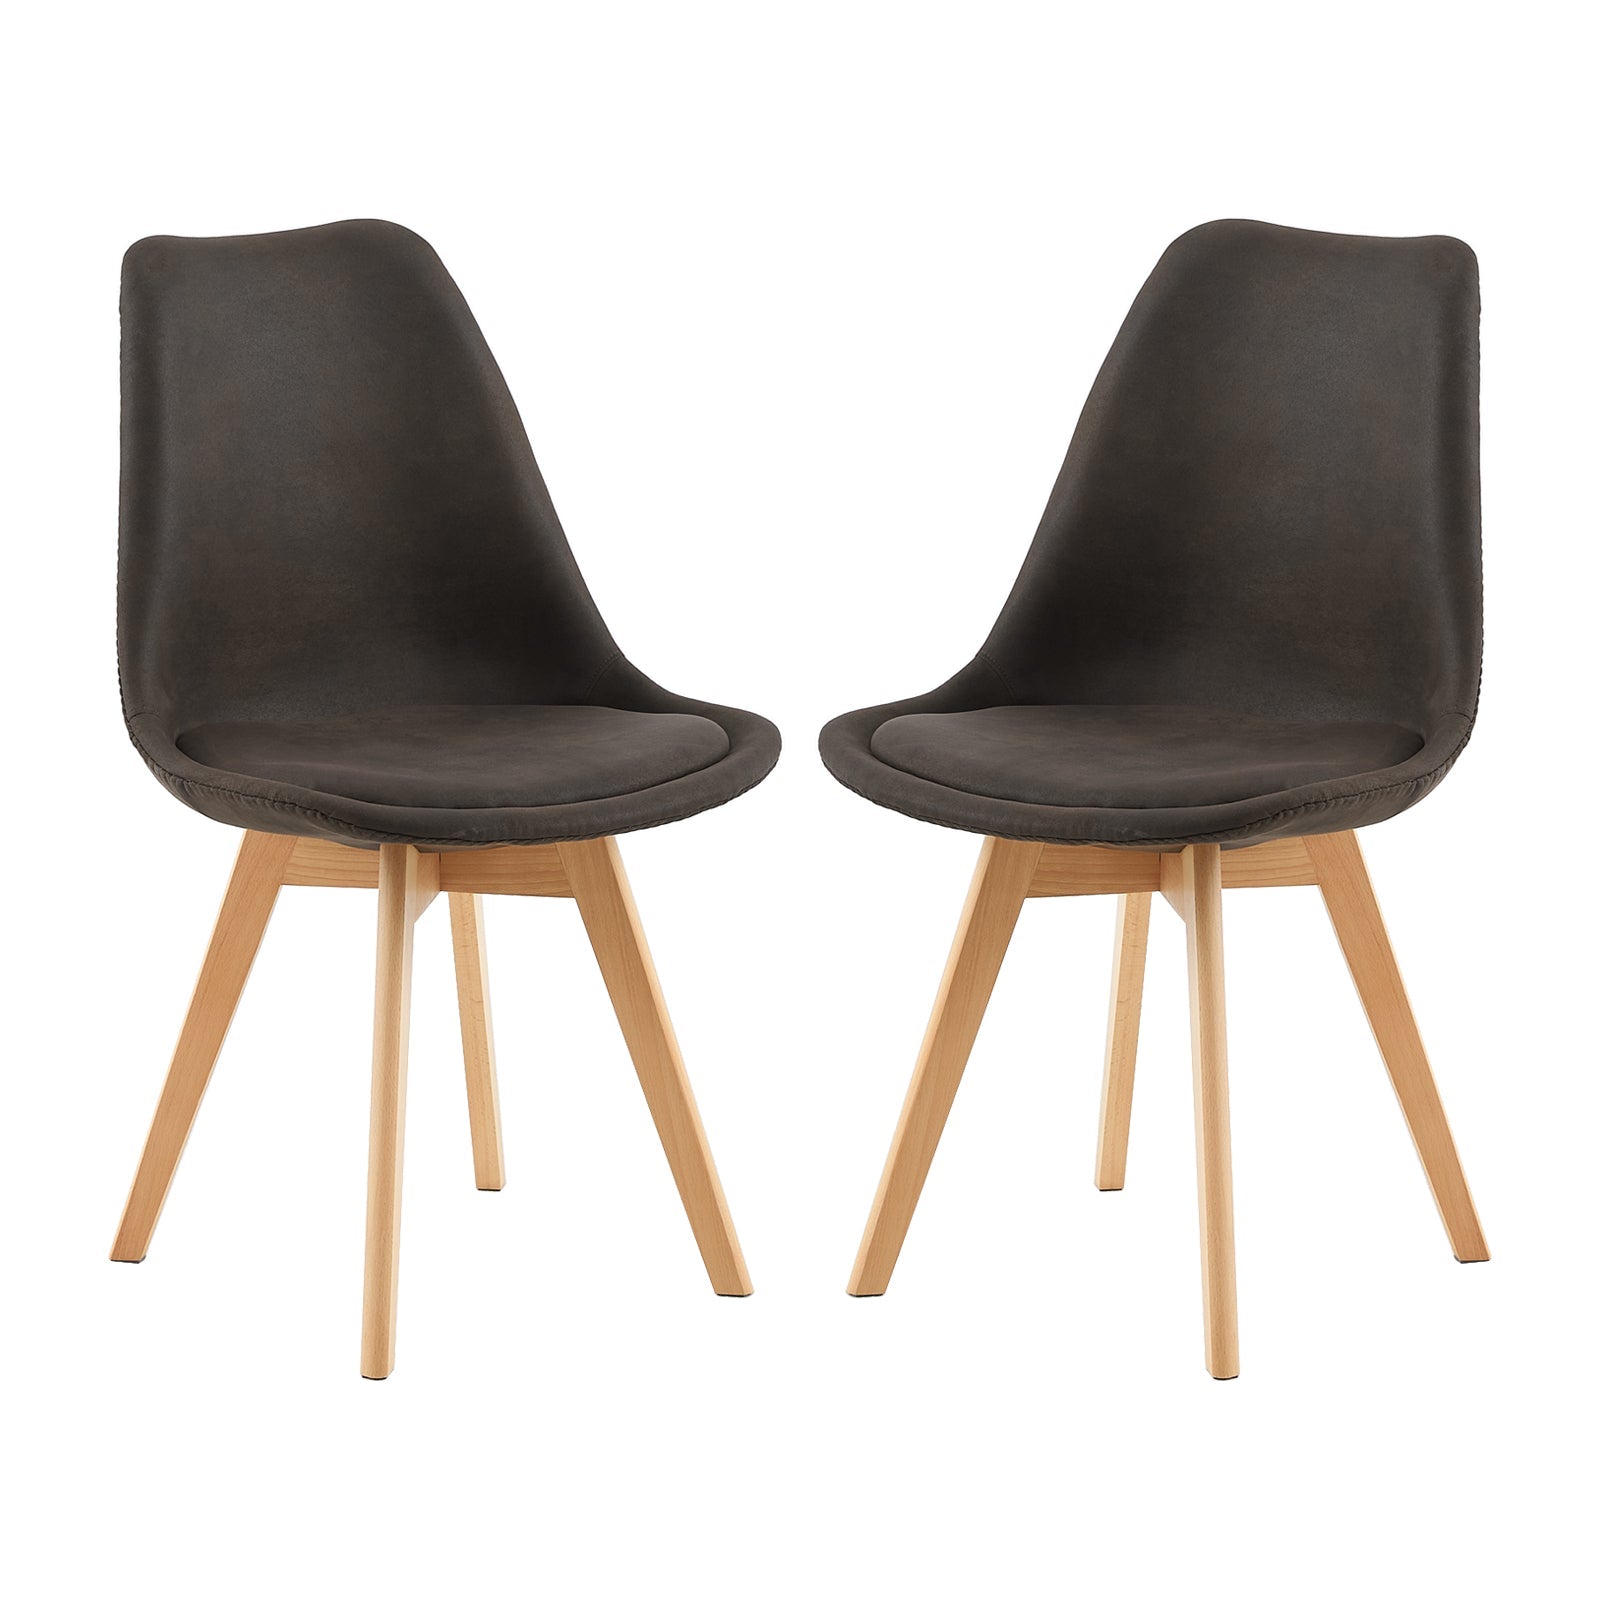 TULIP Technical Cloth Dining Chairs Retro Design Kitchen Chairs with Beech Leg - Dark Grey/Light Brown